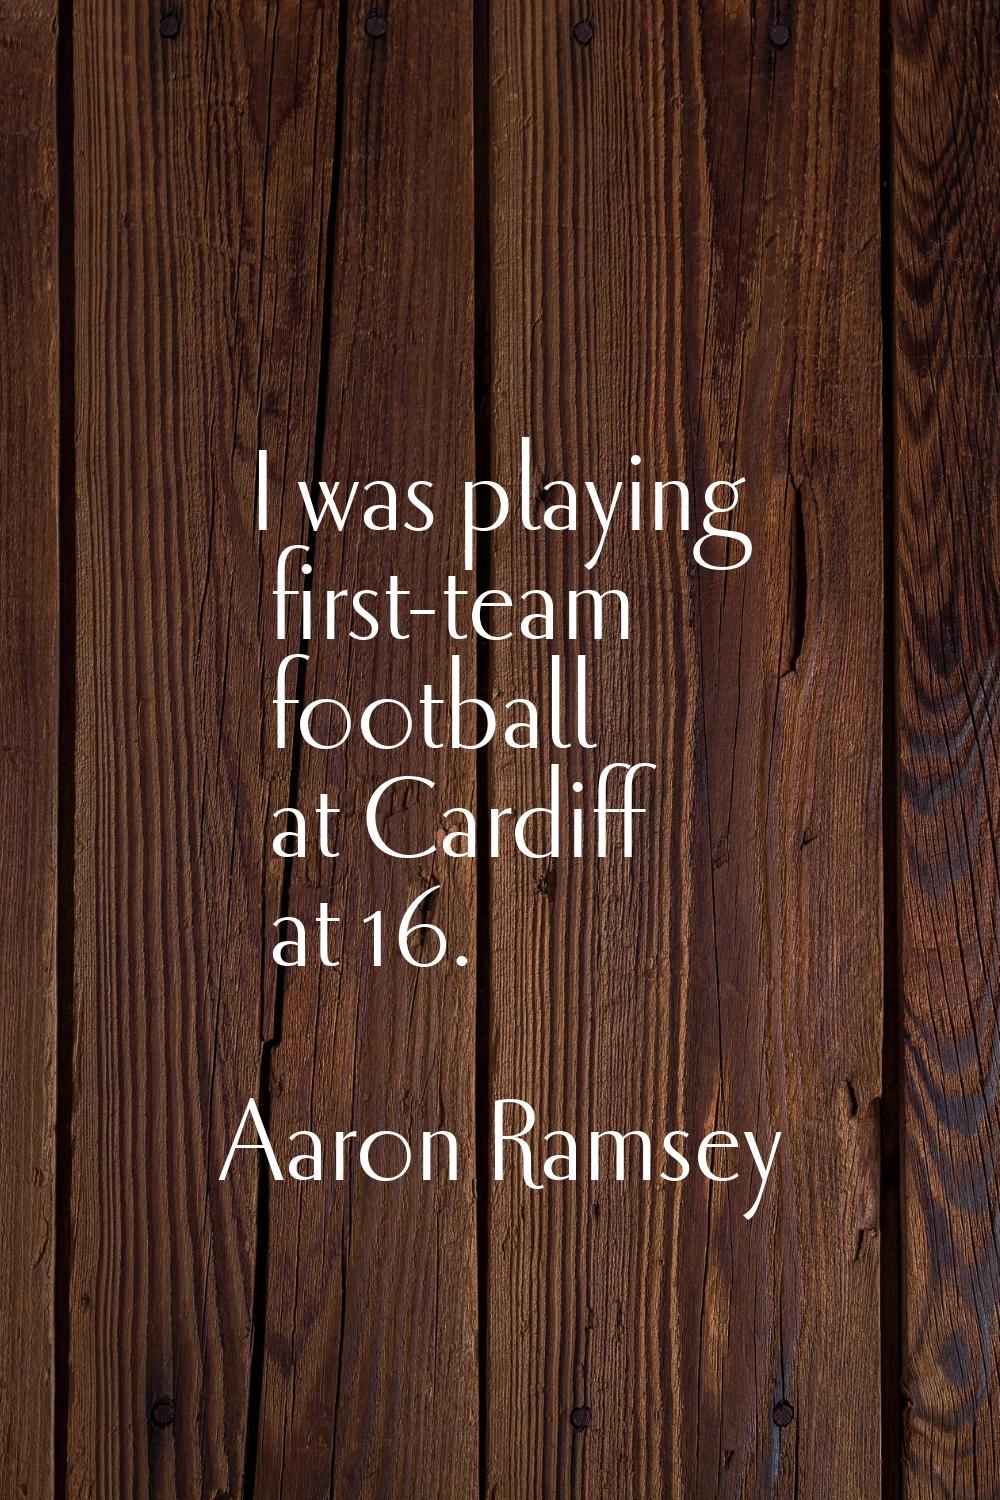 I was playing first-team football at Cardiff at 16.